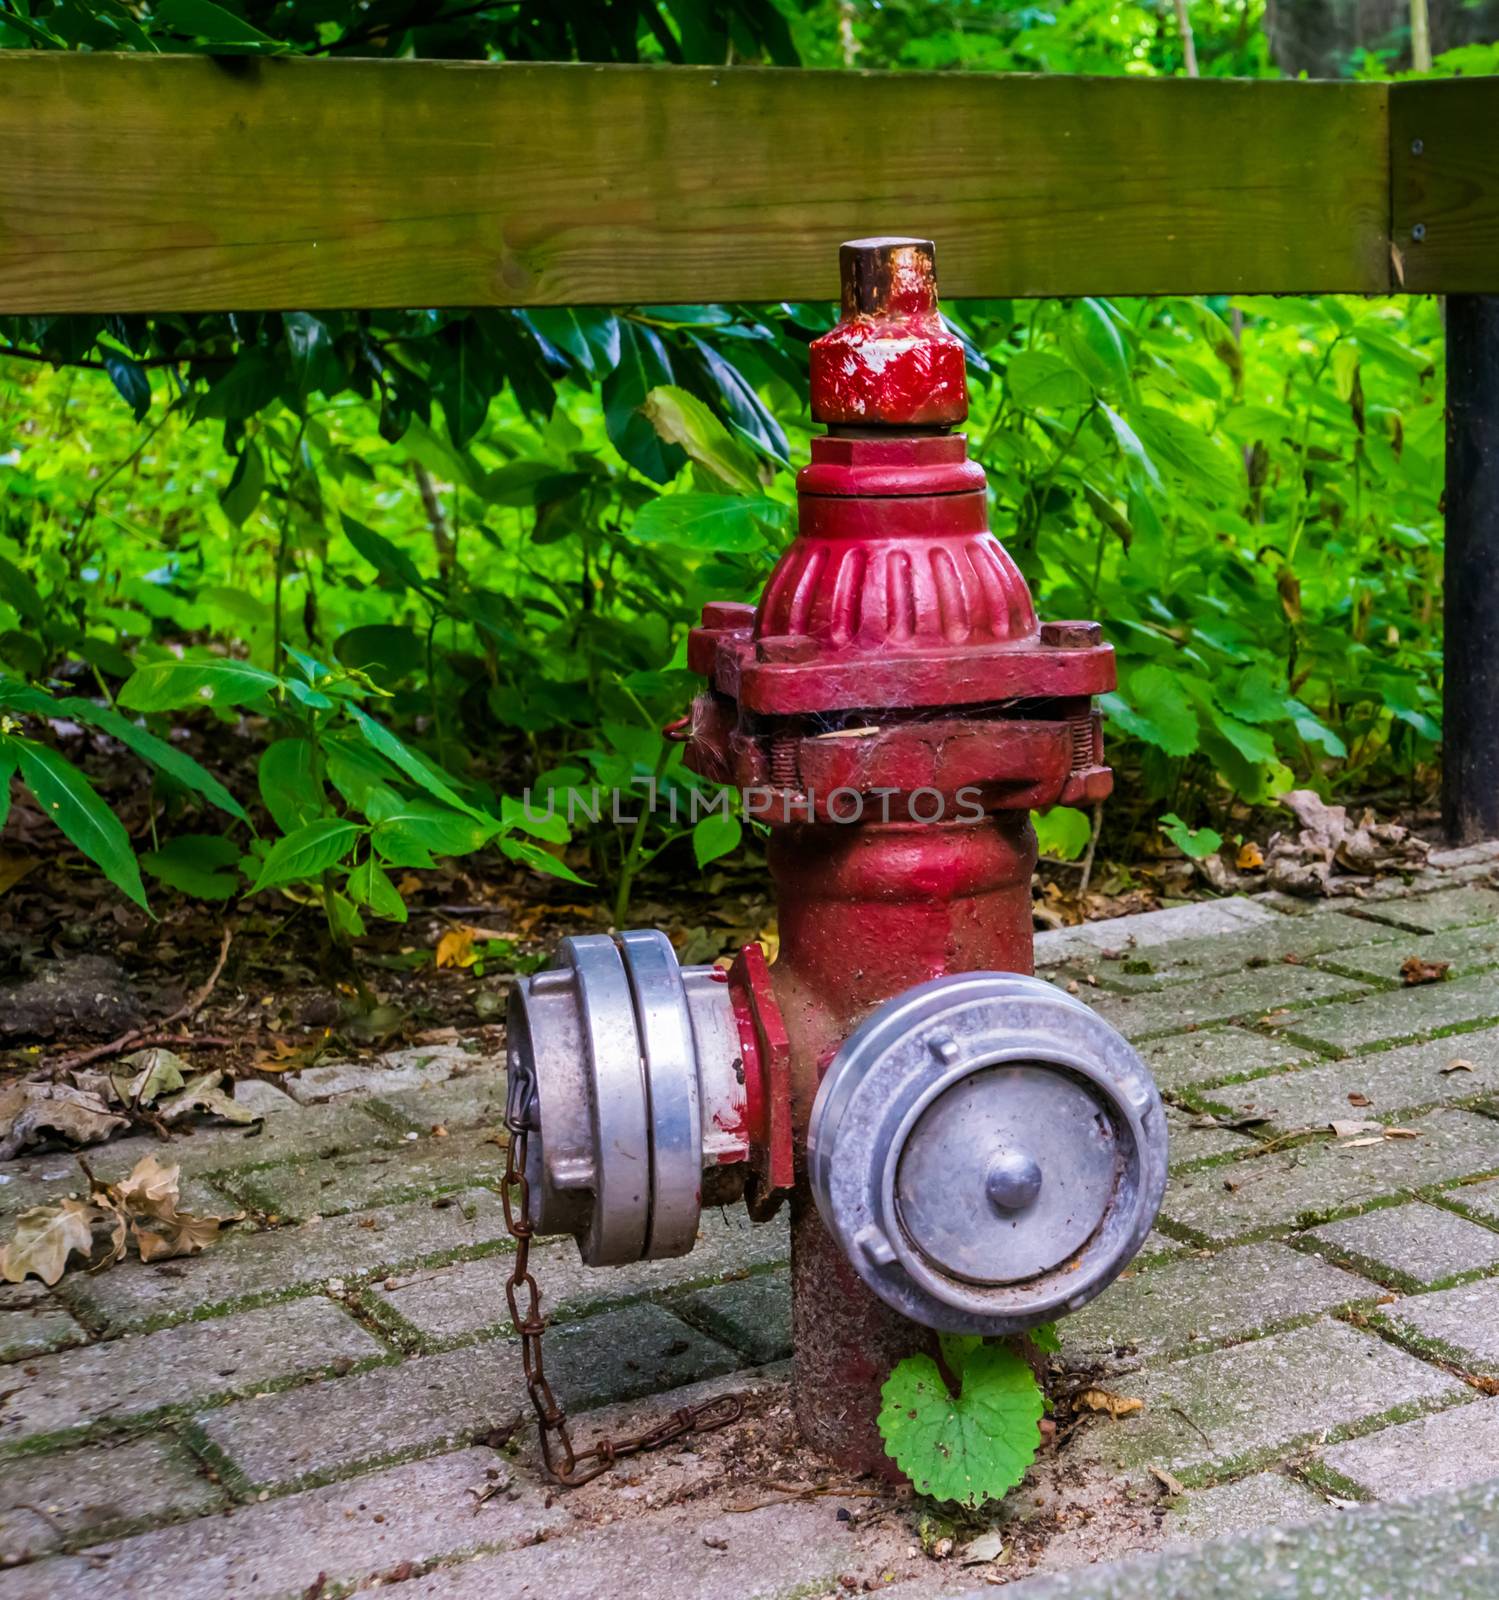 Retro fire prevention system, Red fire hydrant with multiple hose fittings, outdoor safety by charlottebleijenberg